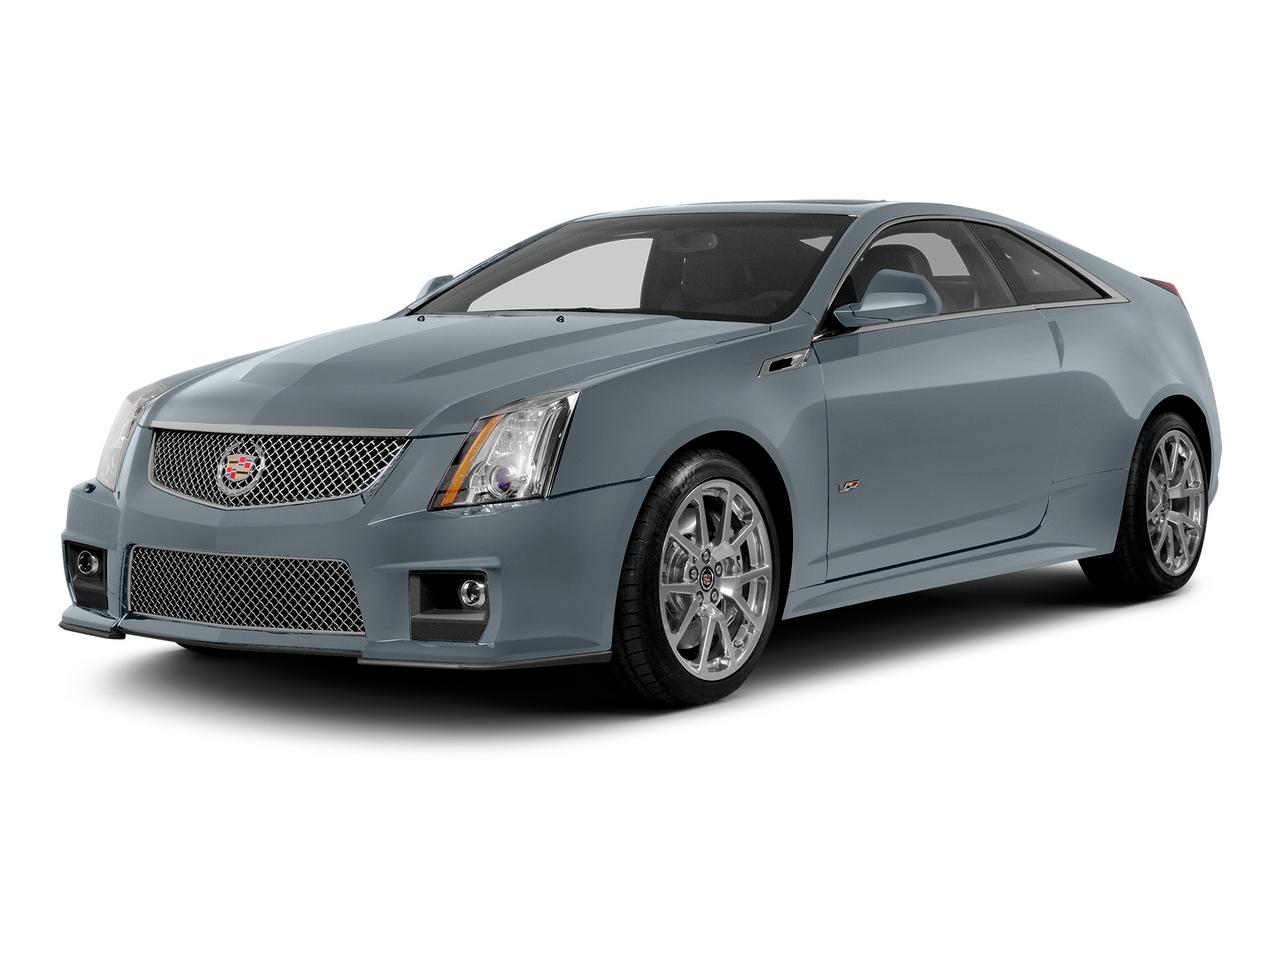 74 Great 2015 cadillac cts exterior colors 